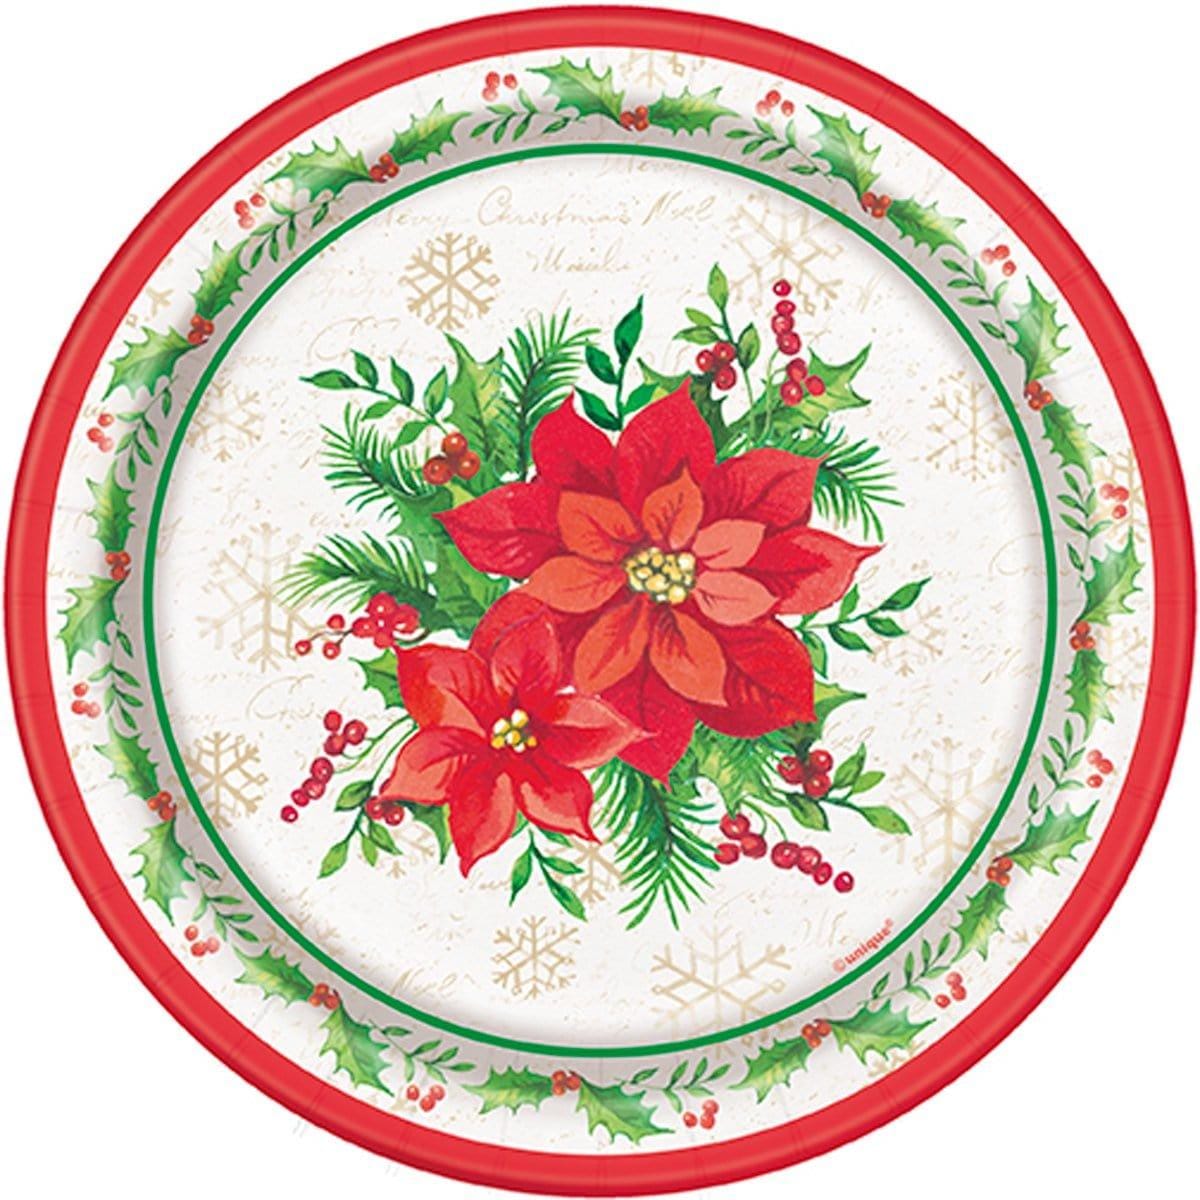 Buy Christmas Festive Poinsettia paper plates 7 inches, 8 per package sold at Party Expert